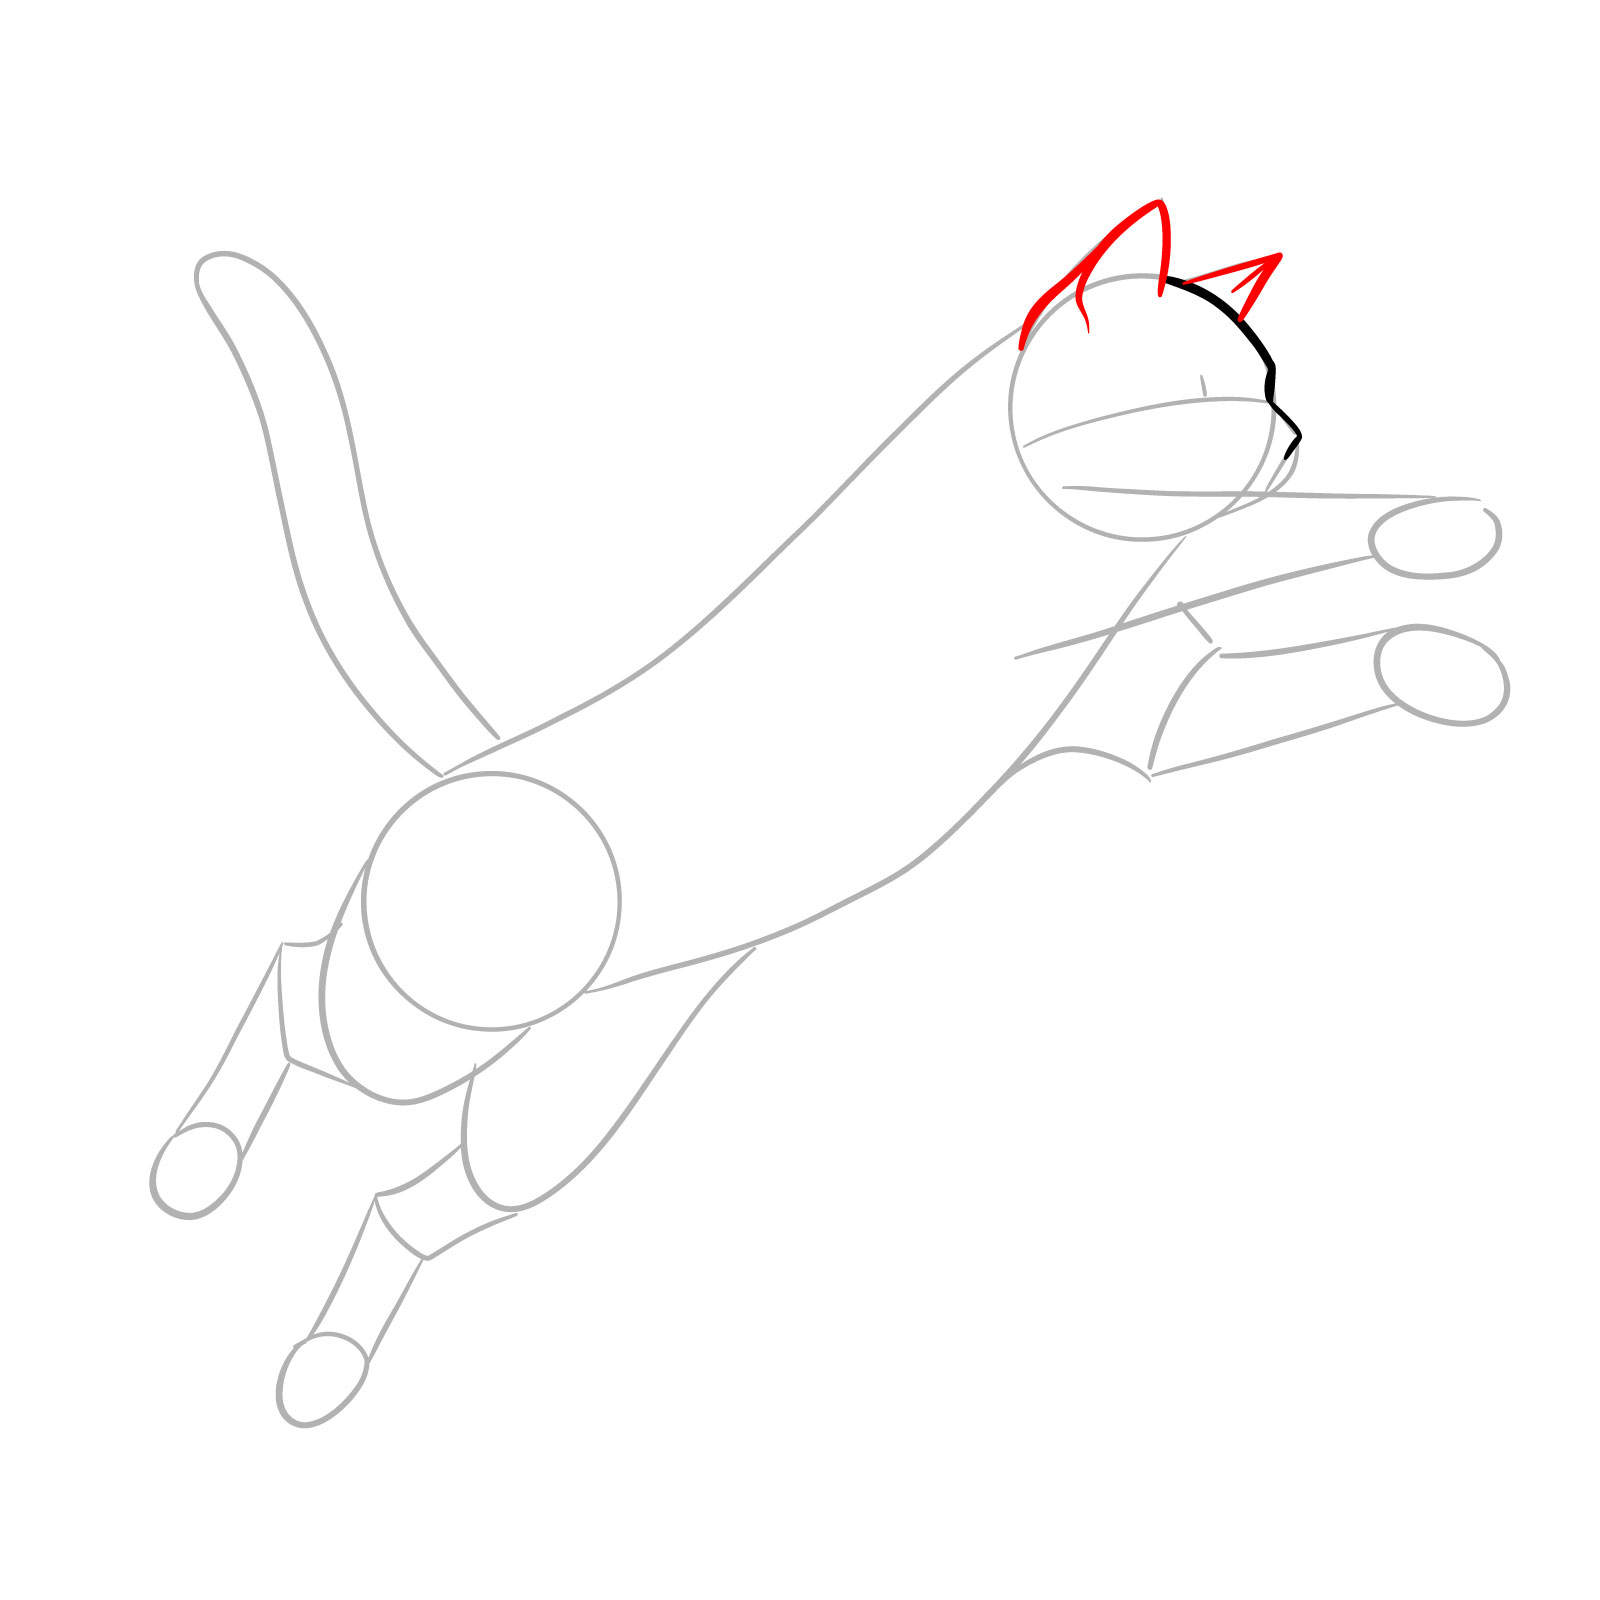 Drawing the ears on a cat's head for a step-by-step guide on how to draw a cat in a jump - step 04